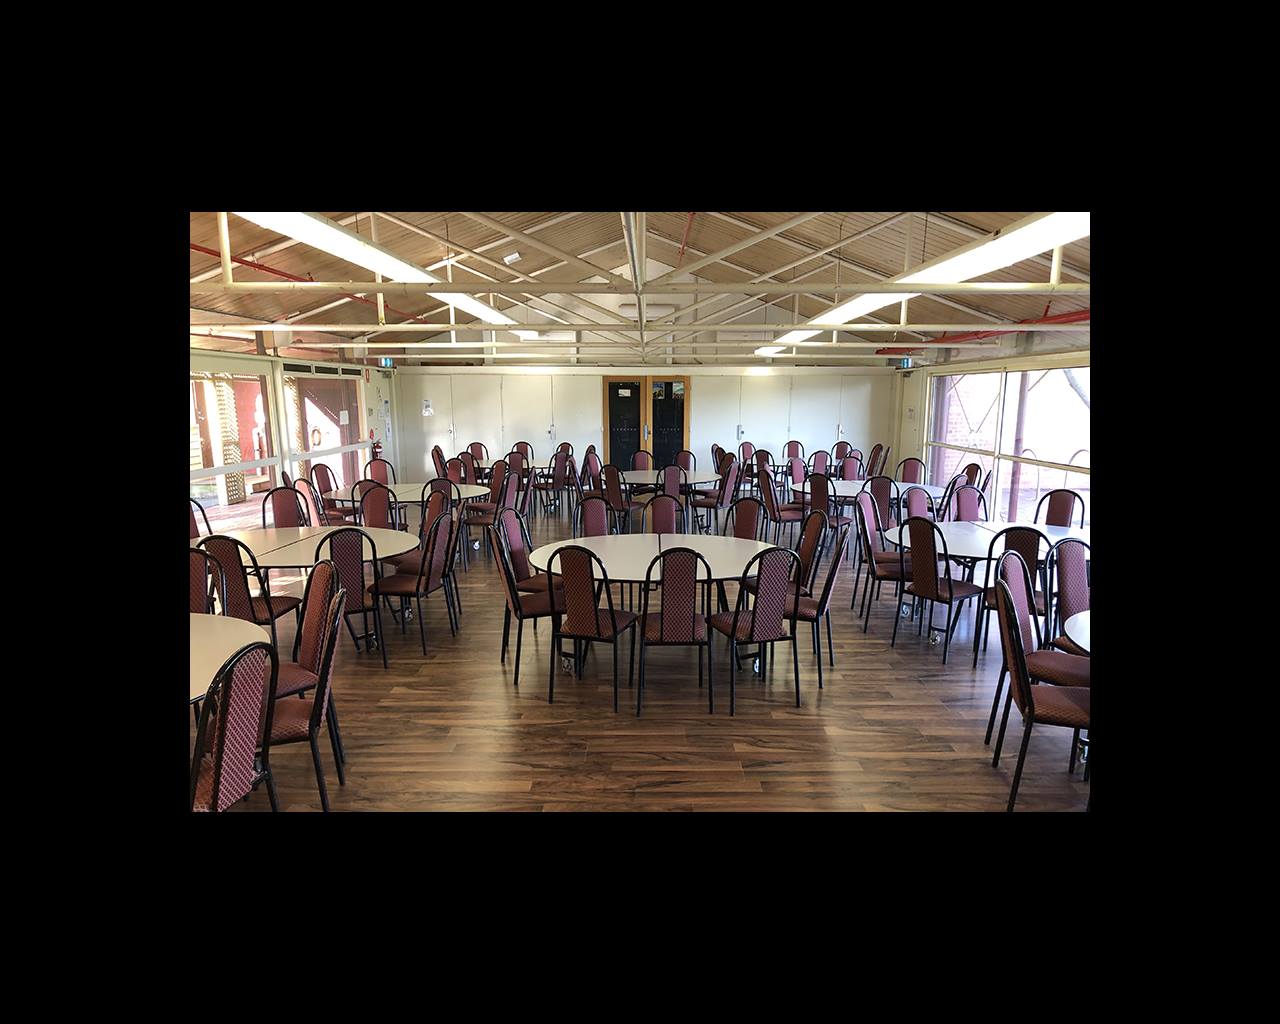 A community hall with round tables and chairs setup for a function